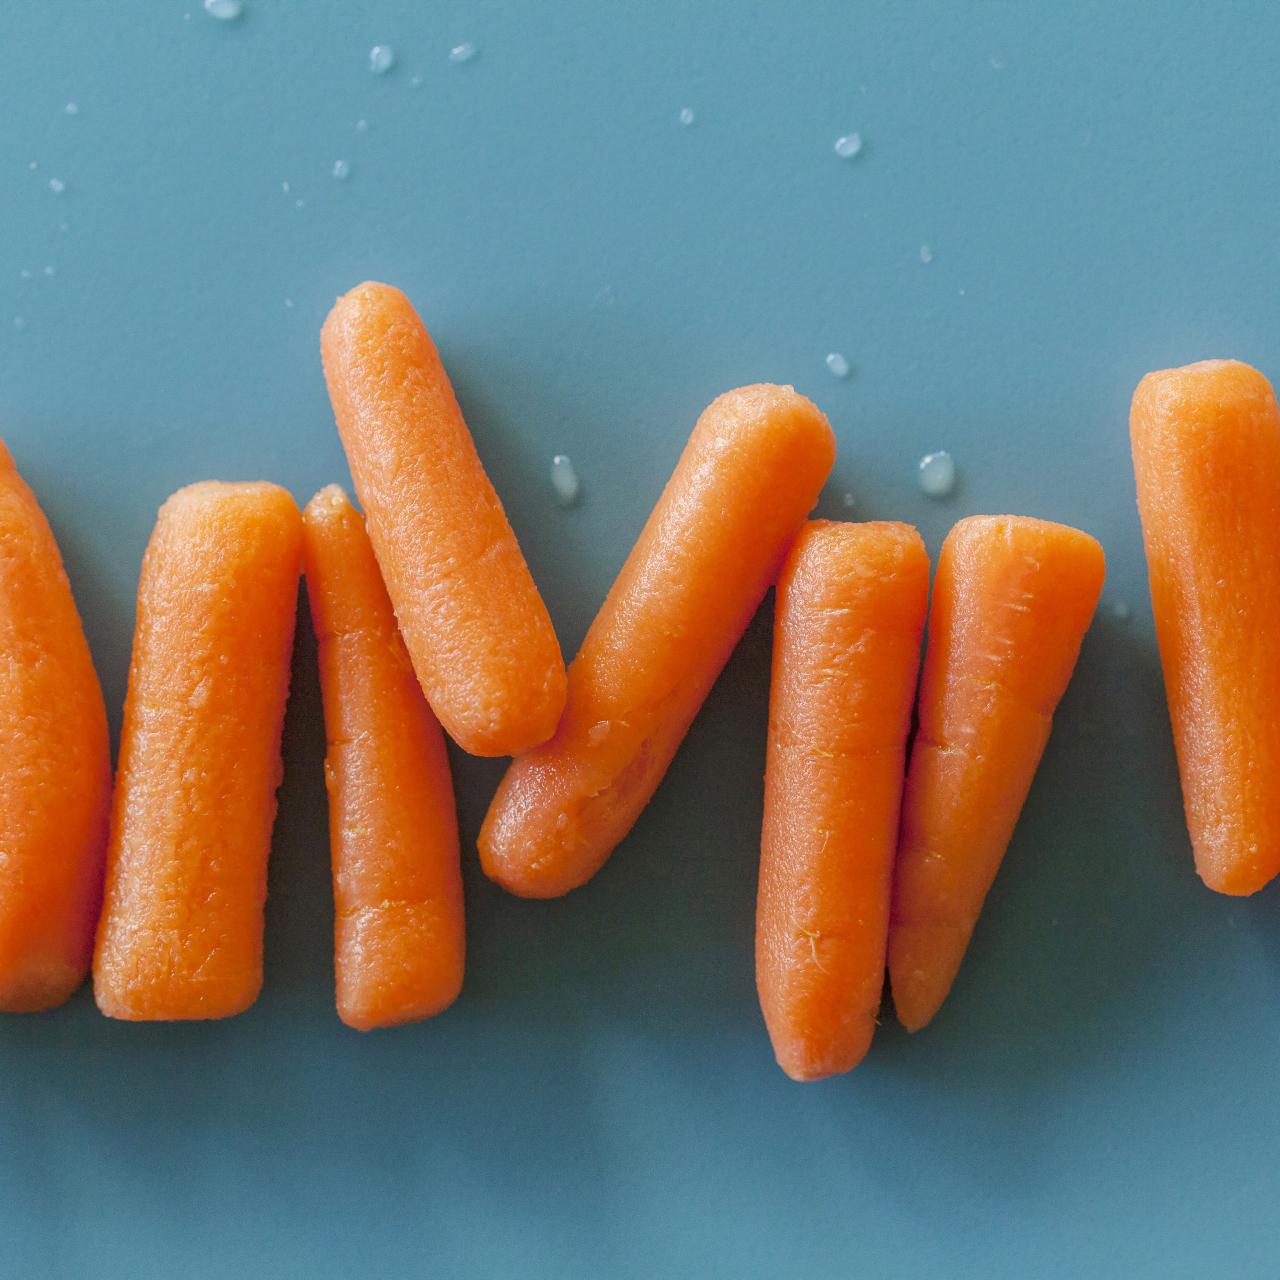 14 Tasty Ways to Use Up a Bag of Baby Carrots : Food Network, Family  Recipes and Kid-Friendly Meals : Food Network